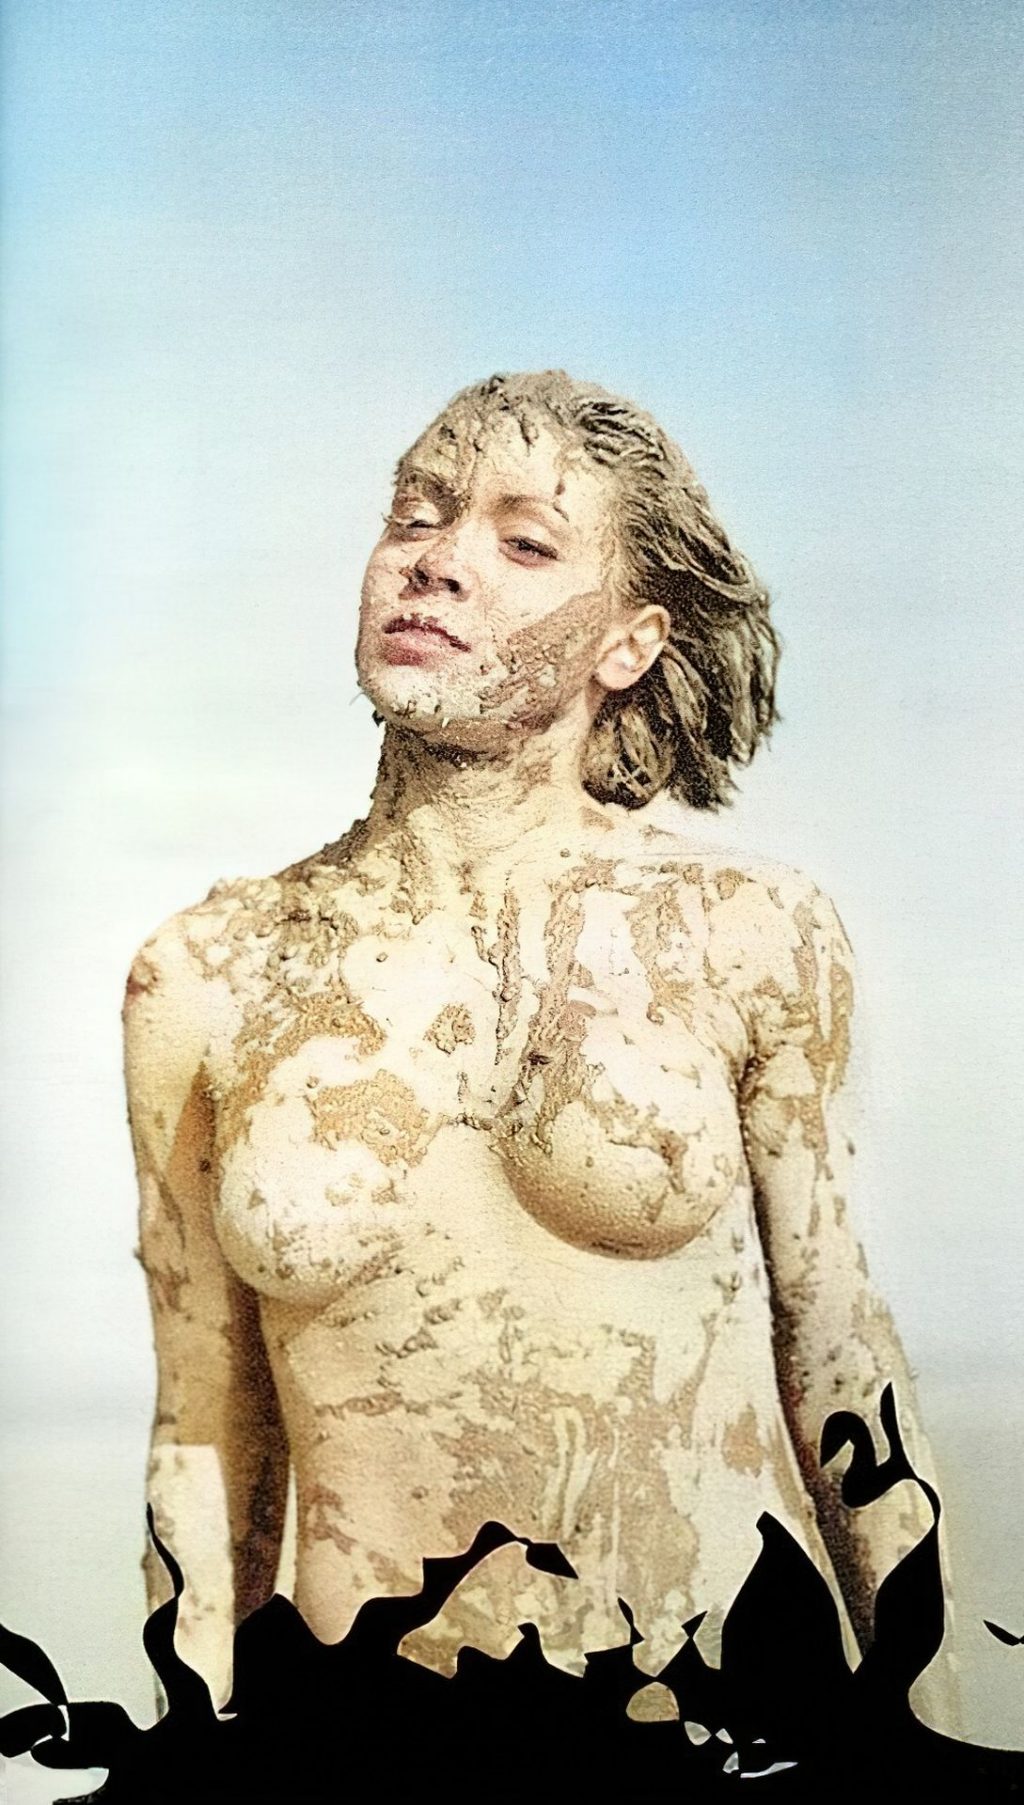 Alyssa Milano Nude at 20-Years-Old (20 Colorized &amp; Enhanced Photos)